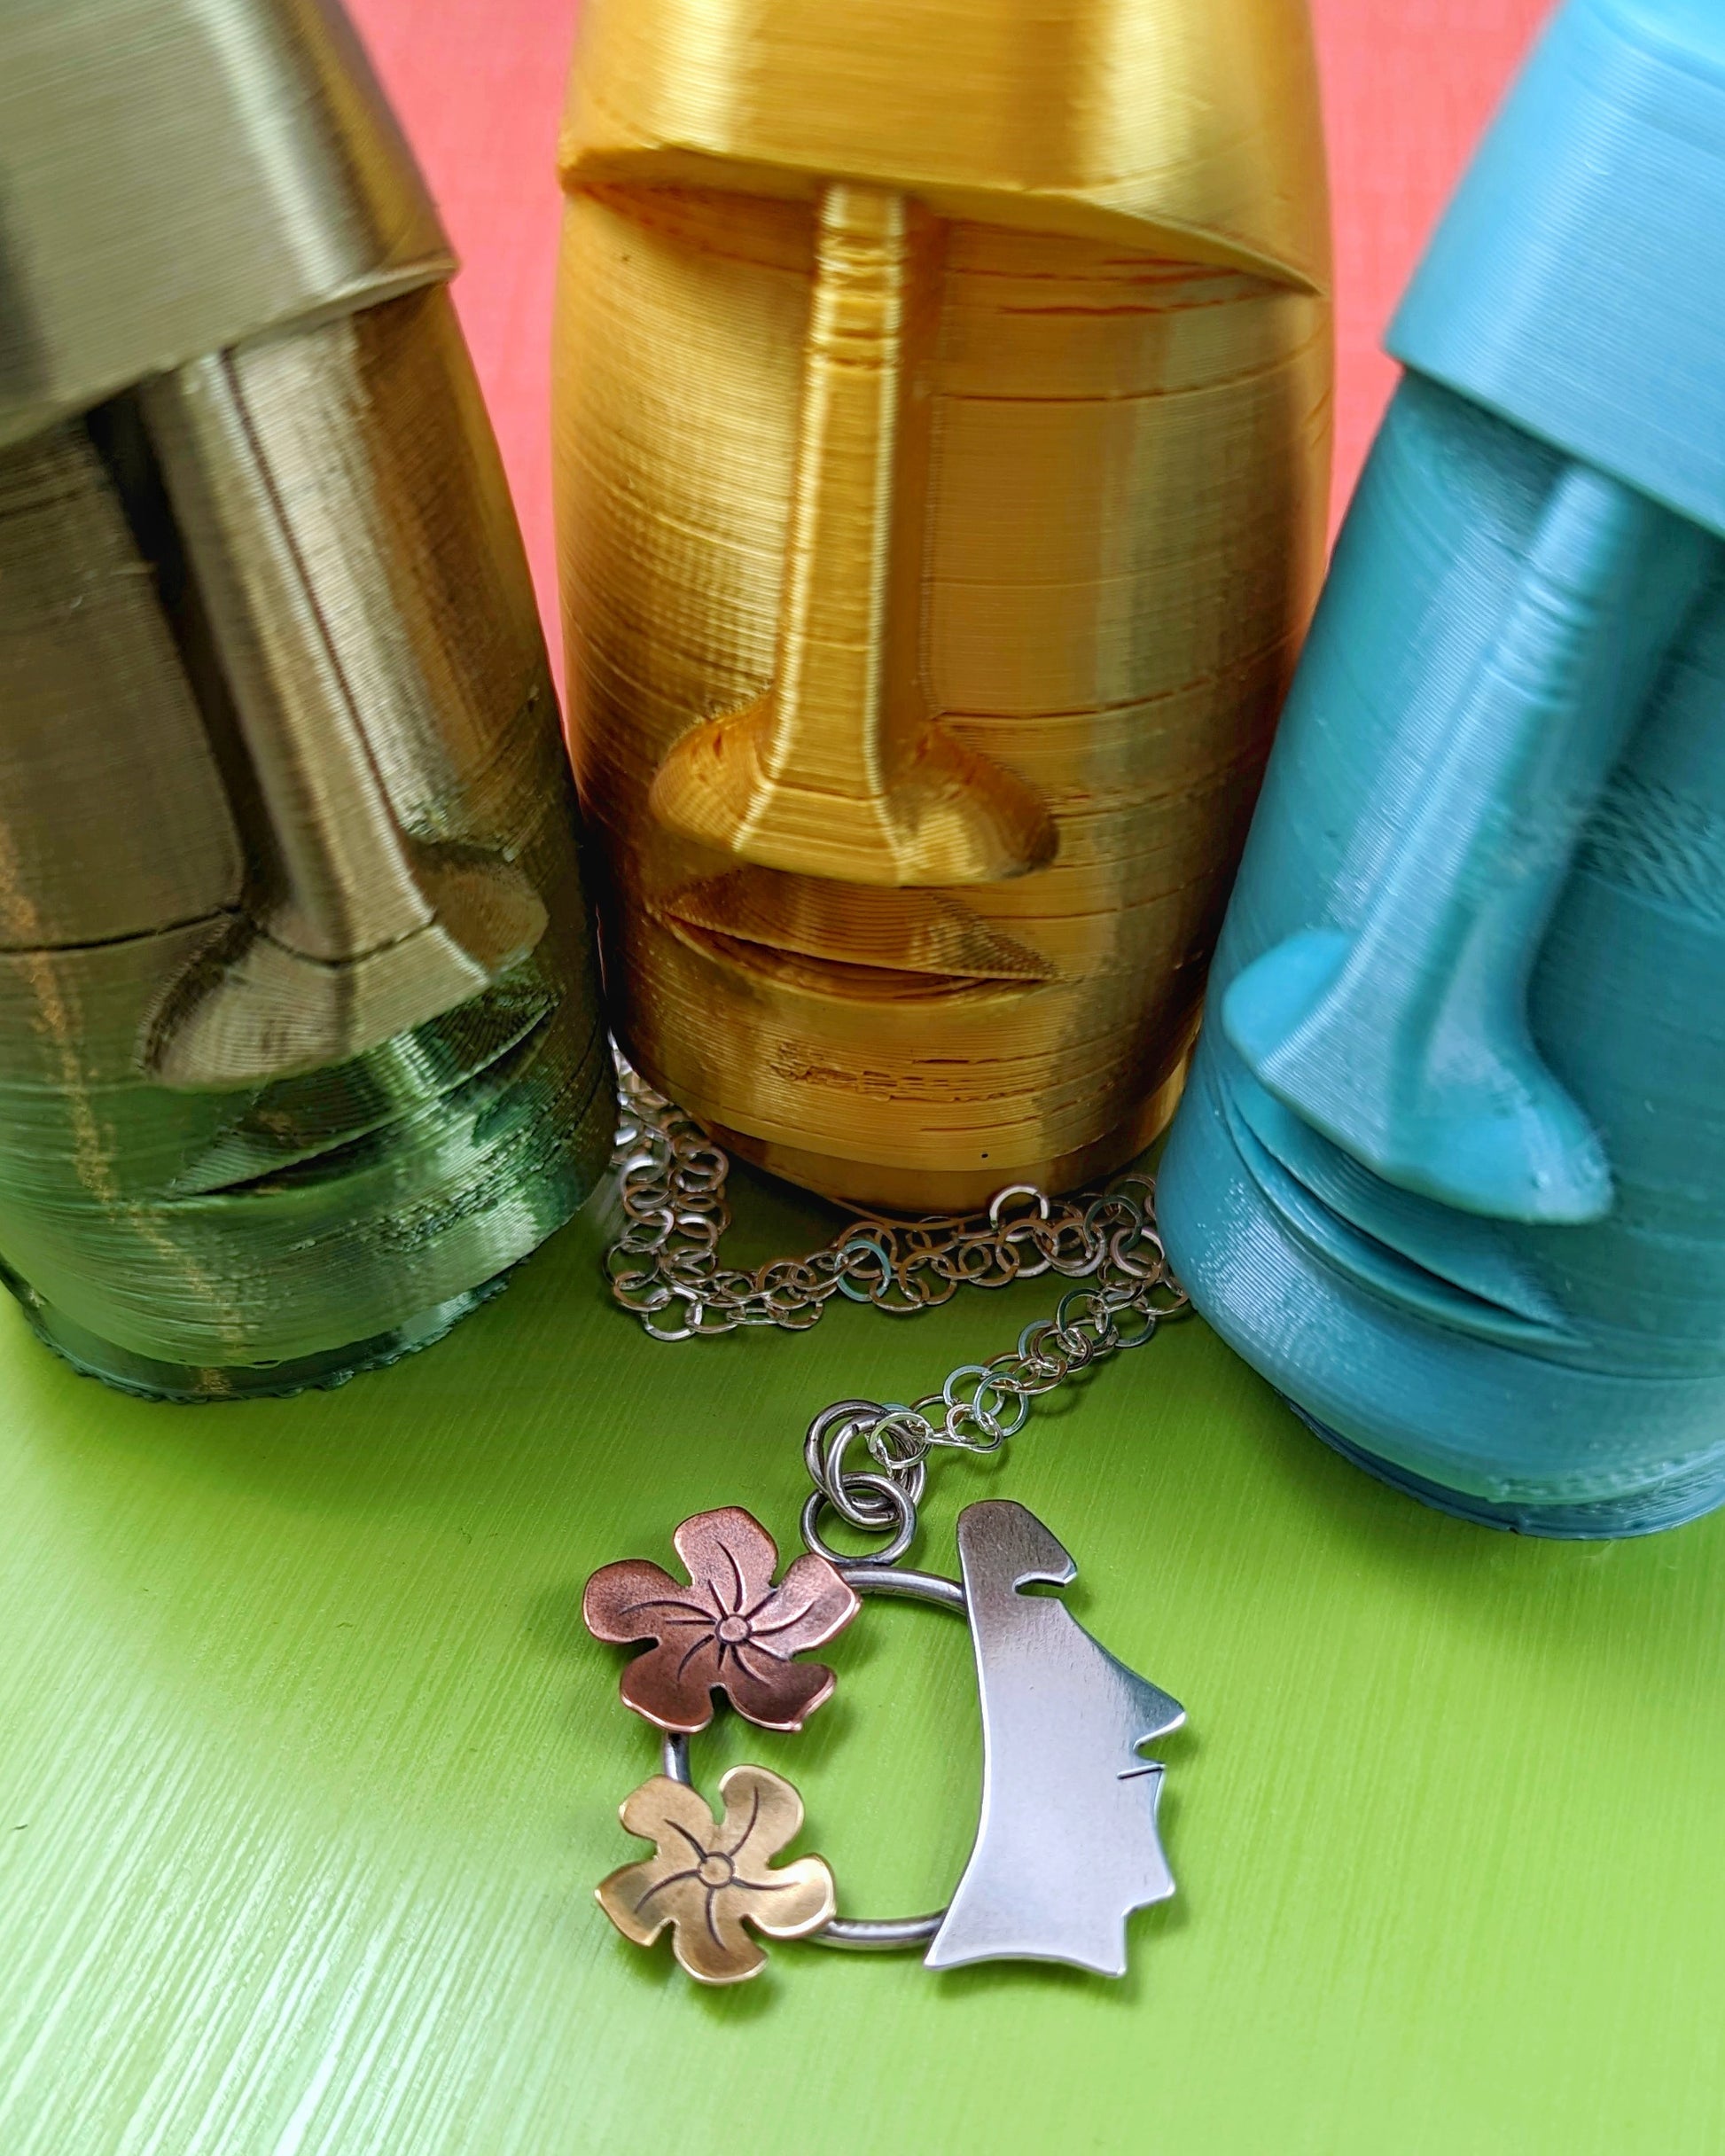 Sterling silver, copper, and brass necklace on green background with moai statues